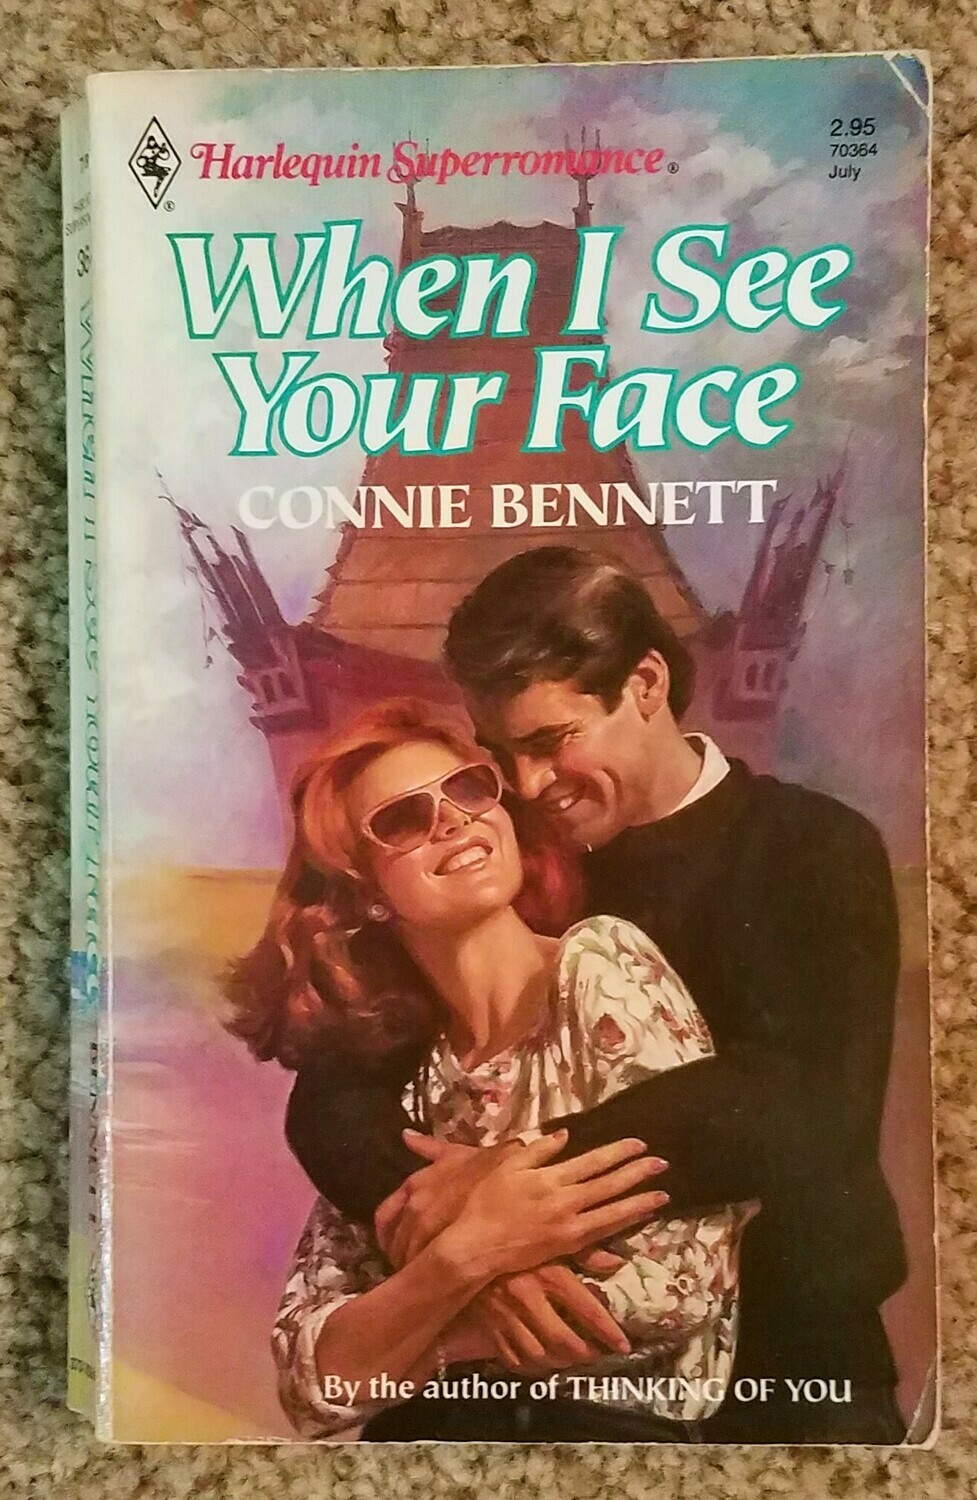 When I See Your Face by Connie Bennett